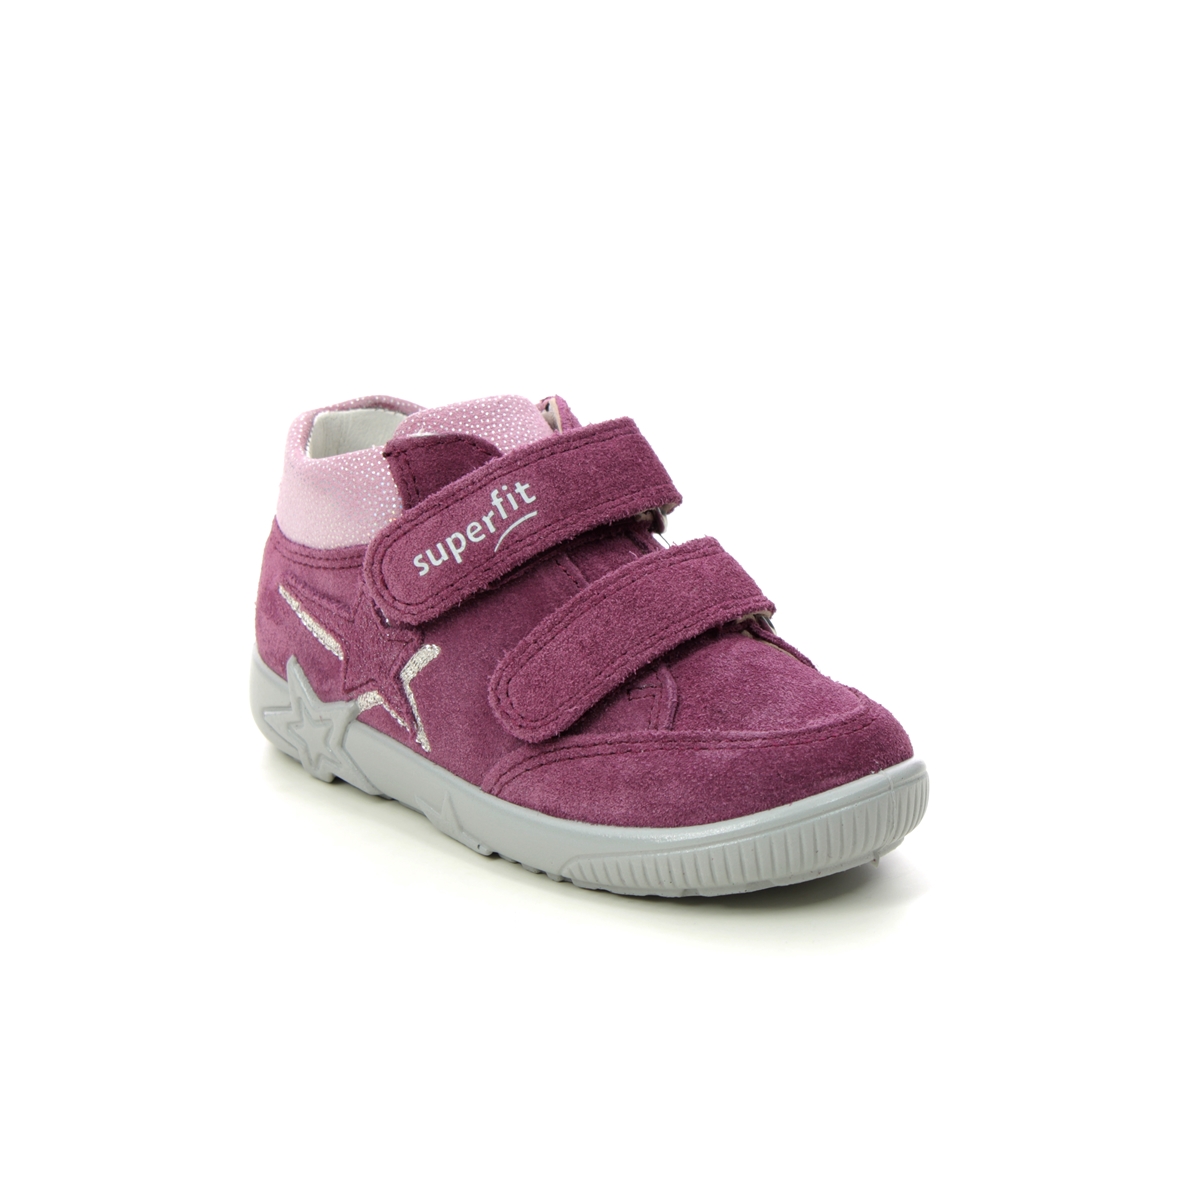 Superfit Starlight Ht 2V Pink Suede Kids First Shoes 1006443-5510 In Size 26 In Plain Pink Suede